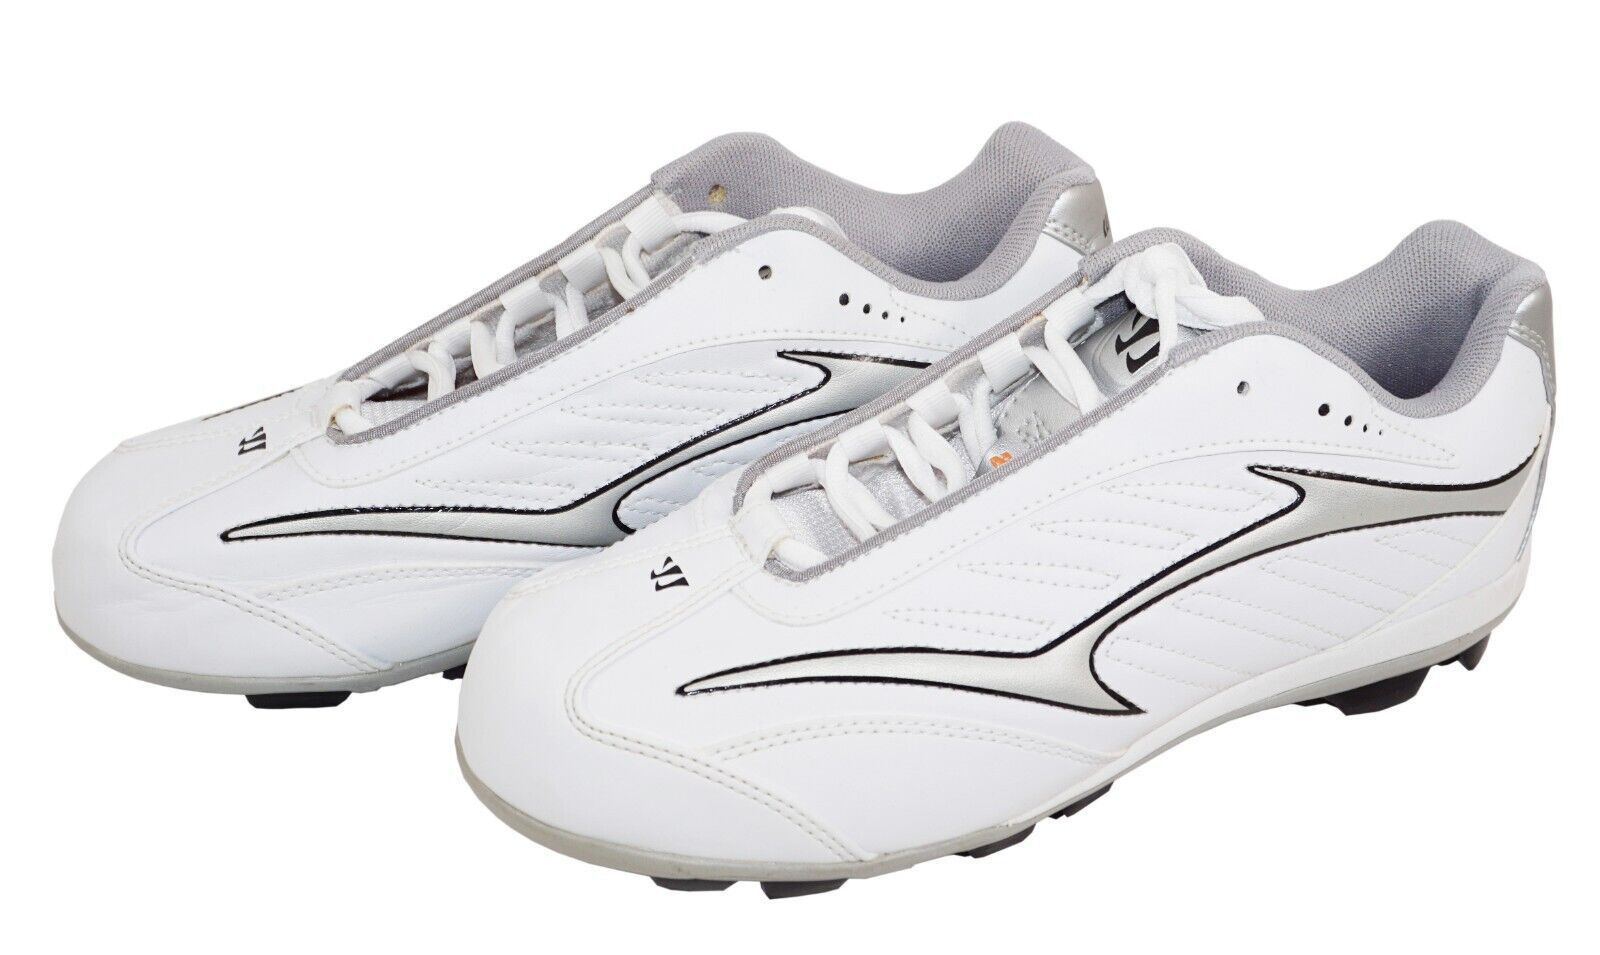 Primary image for WARRIOR Burn Speed 2.0 Low Lacrosse Cleats BJ2LWH - Mens Size 7 White Shoes